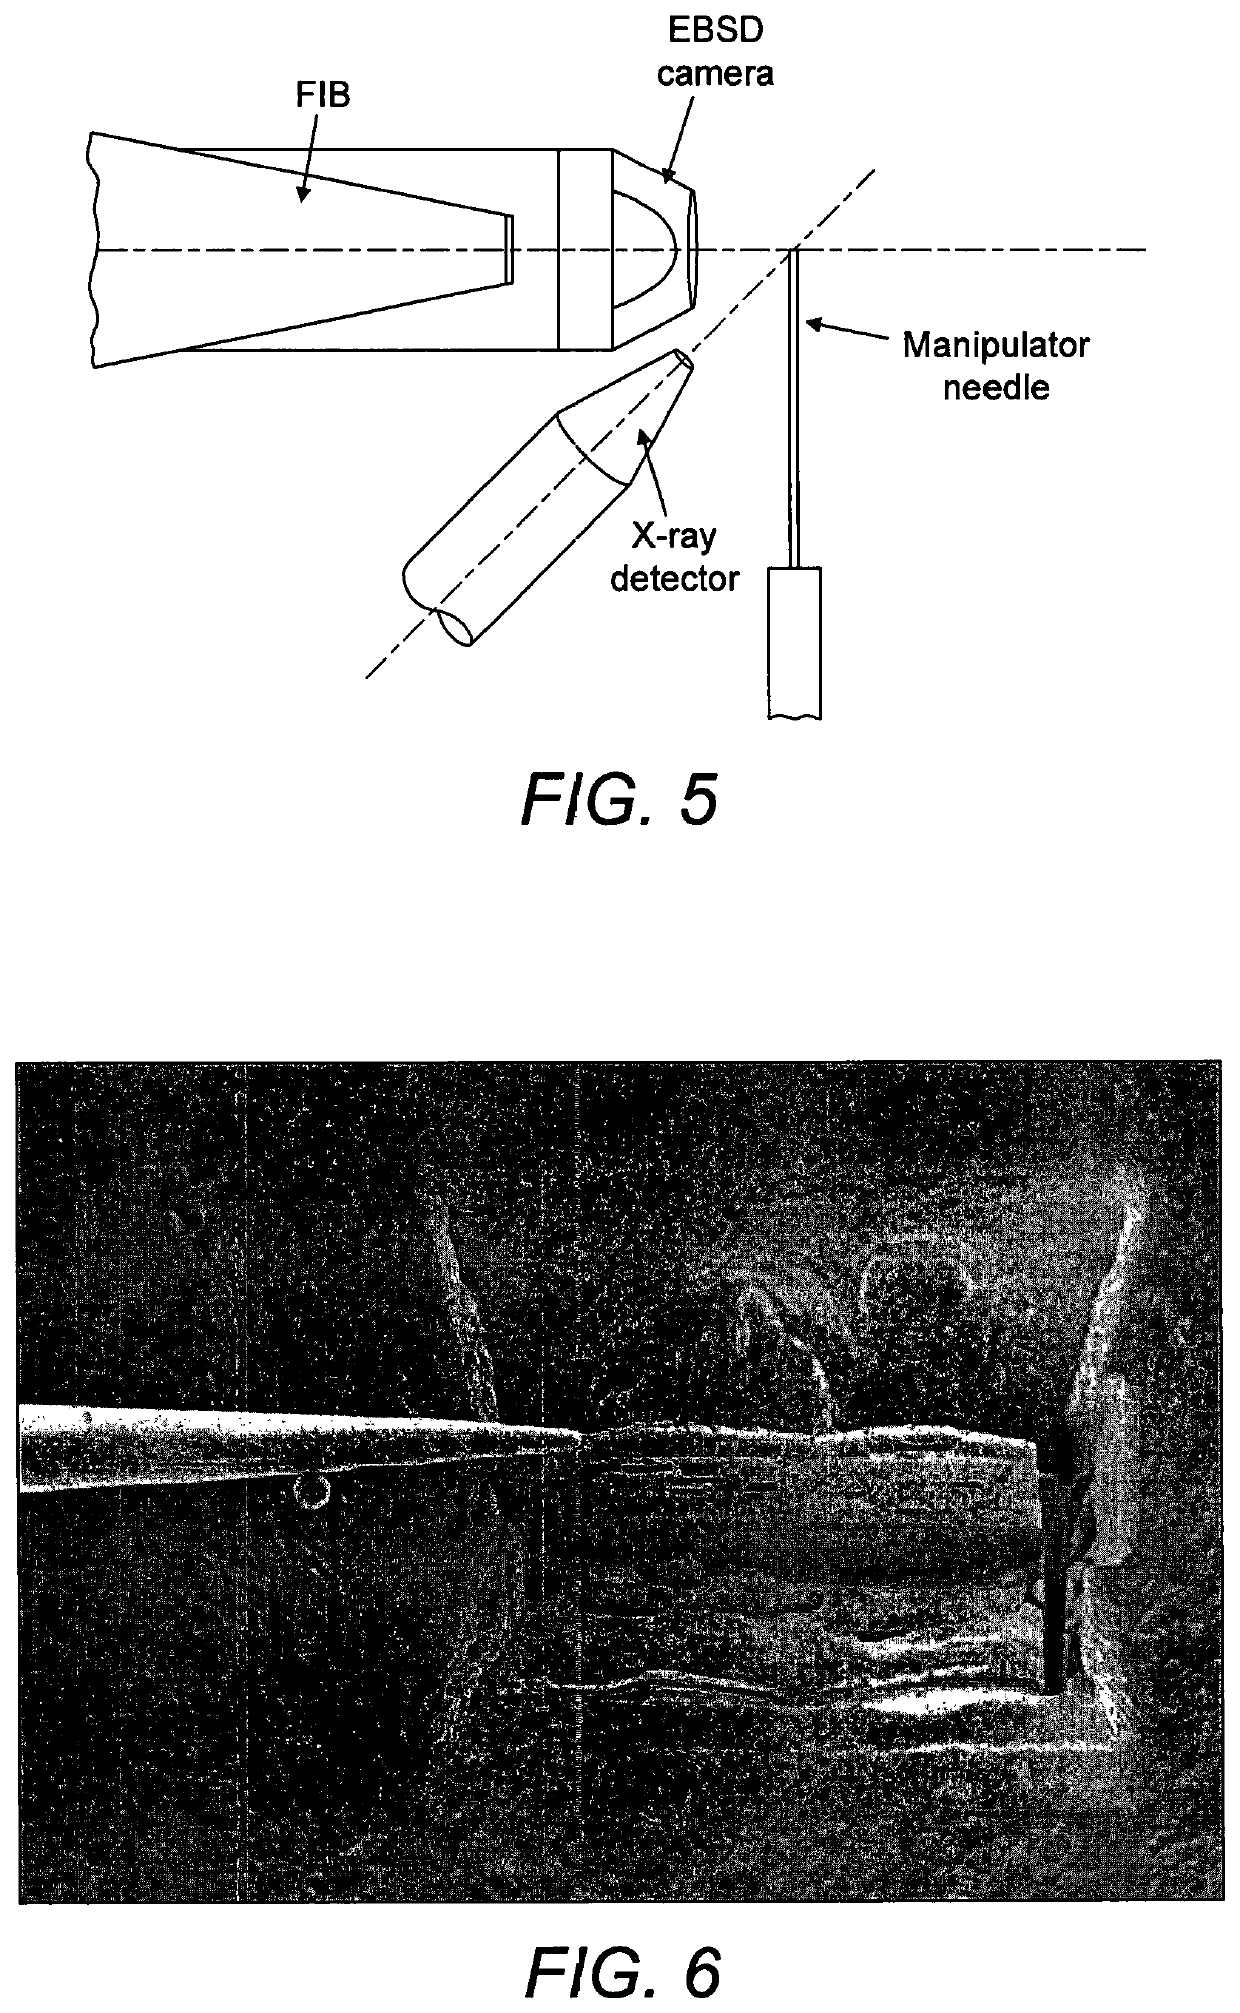 Method of performing electron diffraction pattern analysis upon a sample